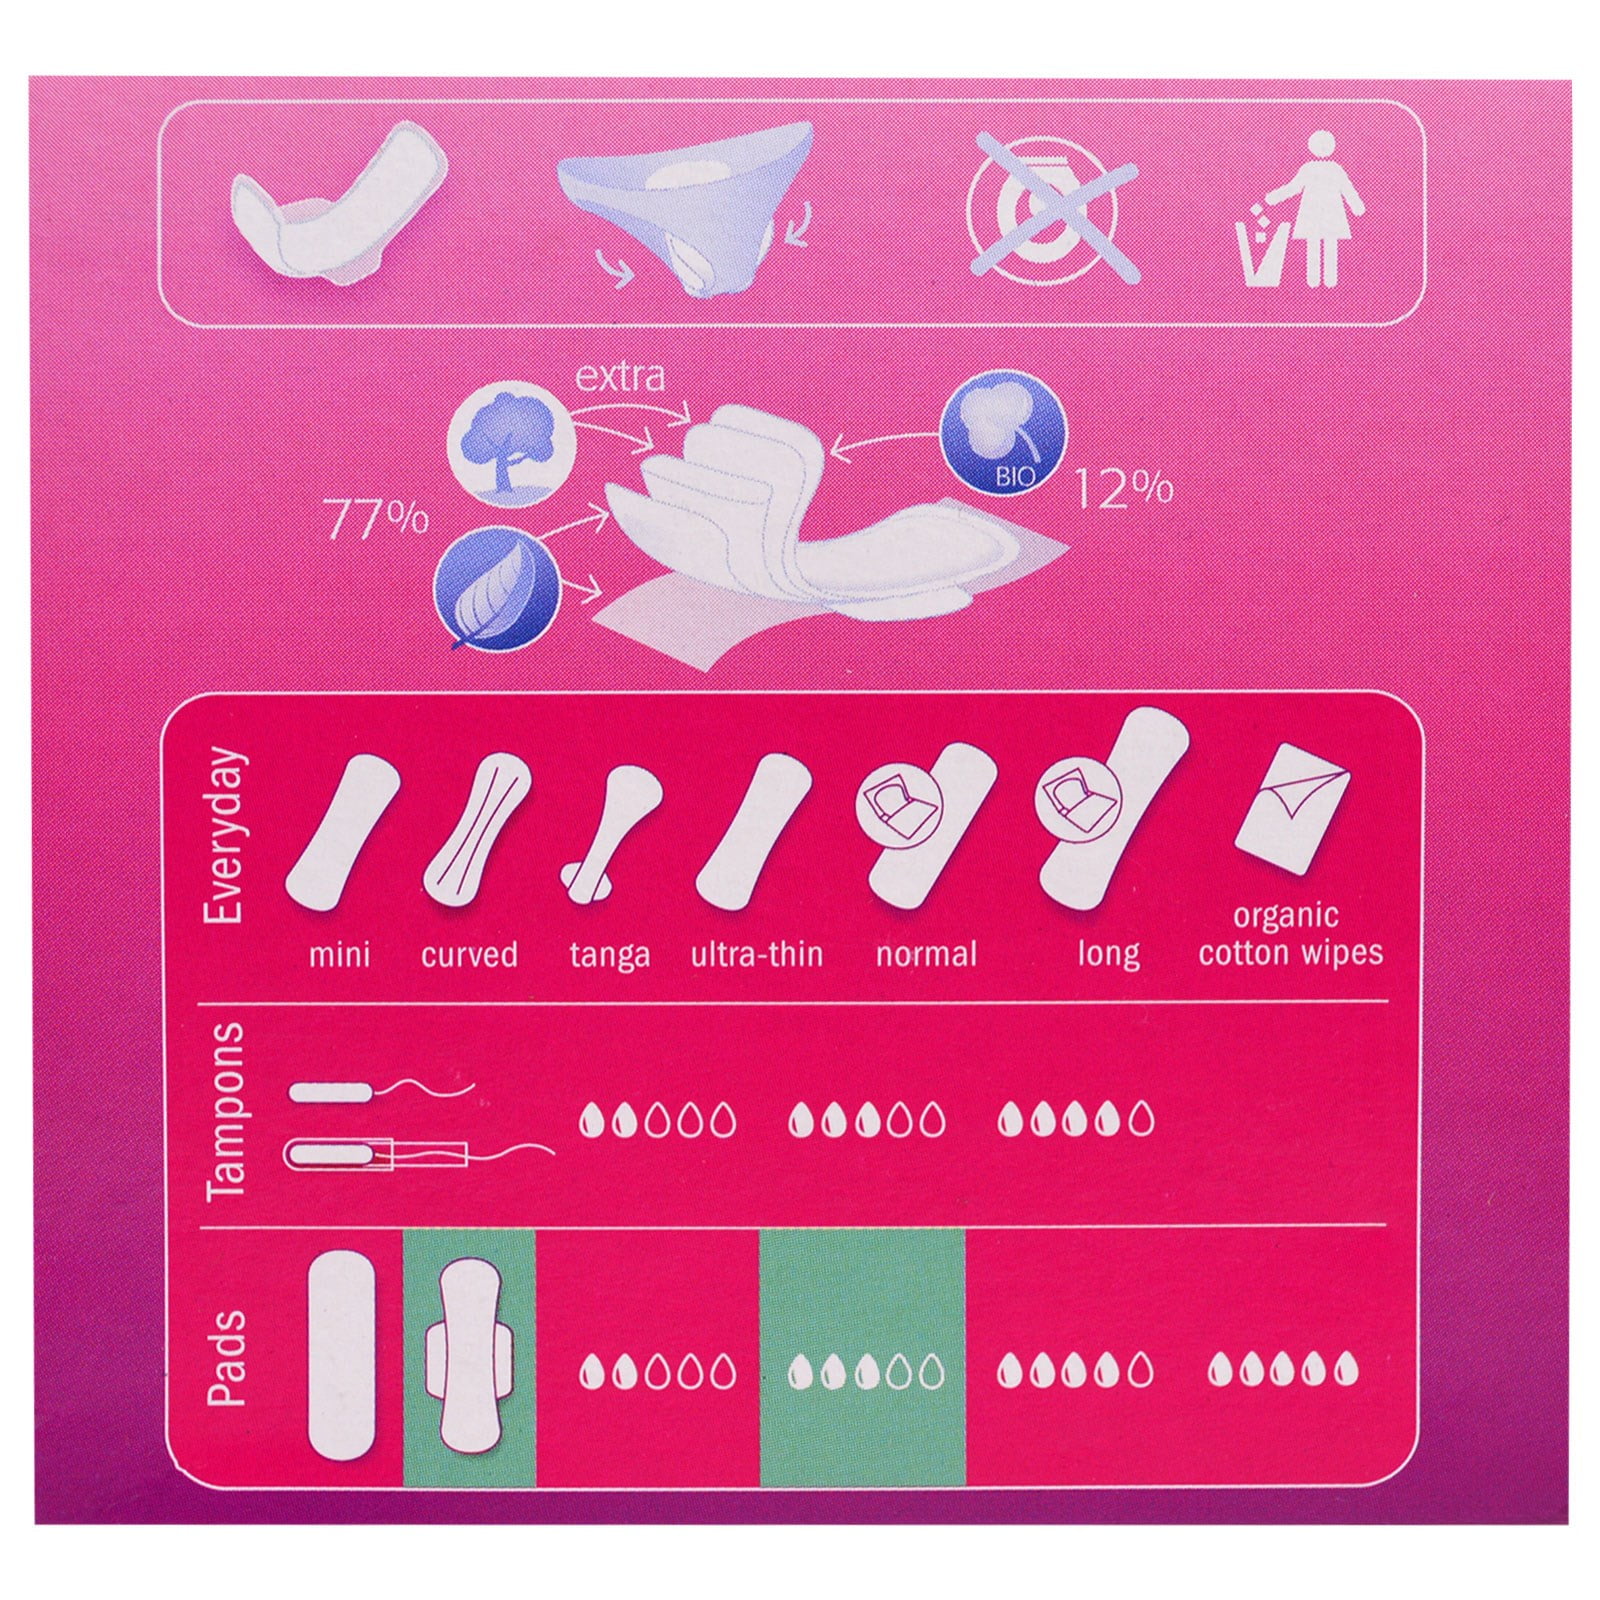 Natracare Ultra Extra Pads w/wings - Normal - 12 Count 